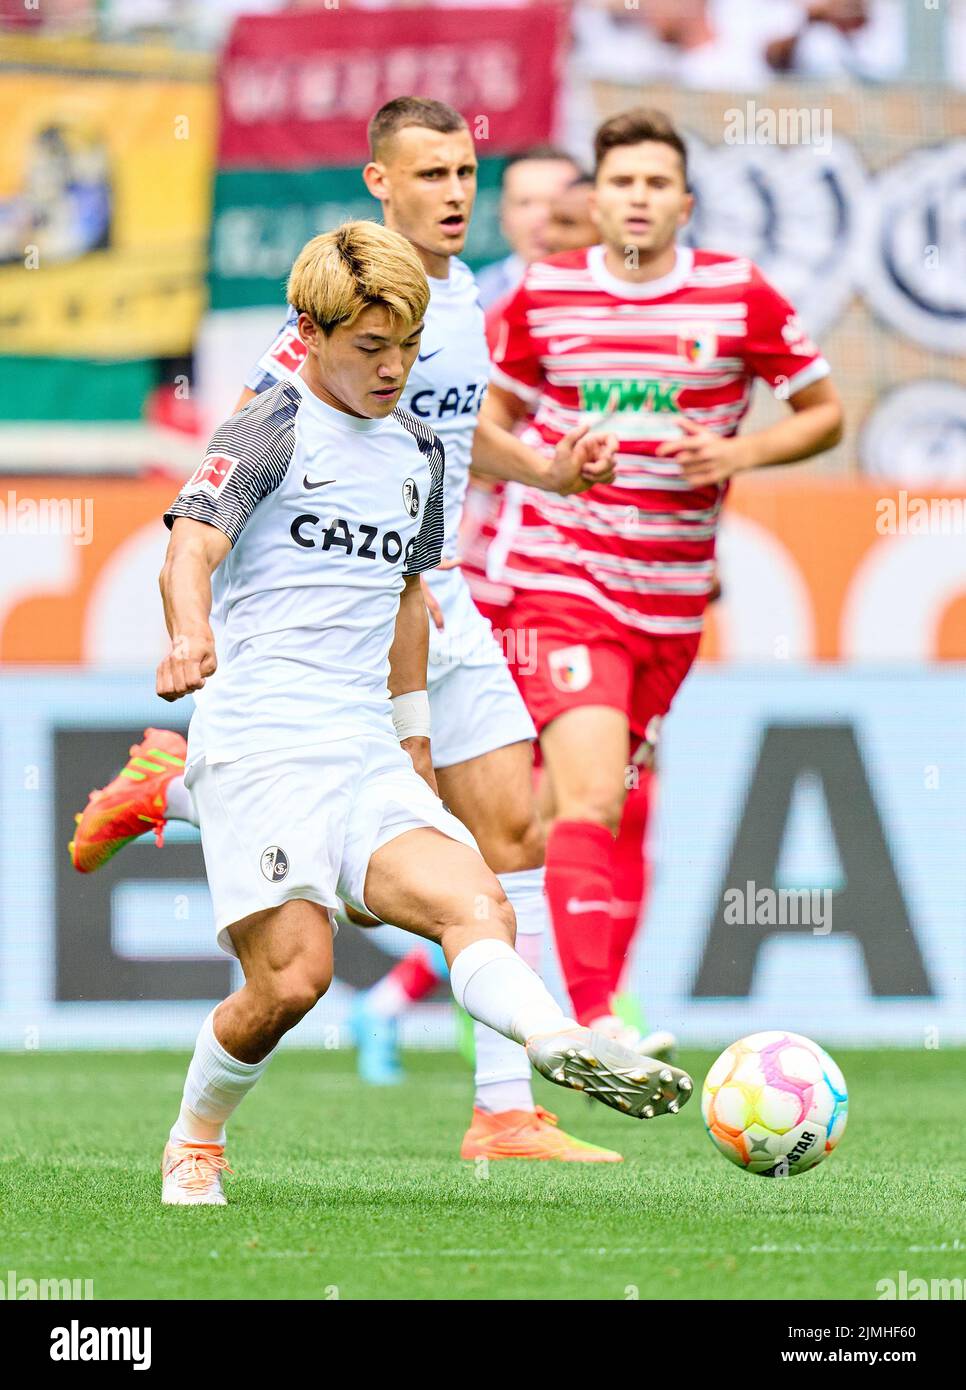 Ritsu Doan, FRG 42  in the match FC AUGSBURG - SC FREIBURG 0-4 1.German Football League on Aug 06, 2022 in Augsburg, Germany. Season 2022/2023, matchday 1, 1.Bundesliga, FCB, Munich, 1.Spieltag © Peter Schatz / Alamy Live News    - DFL REGULATIONS PROHIBIT ANY USE OF PHOTOGRAPHS as IMAGE SEQUENCES and/or QUASI-VIDEO - Stock Photo